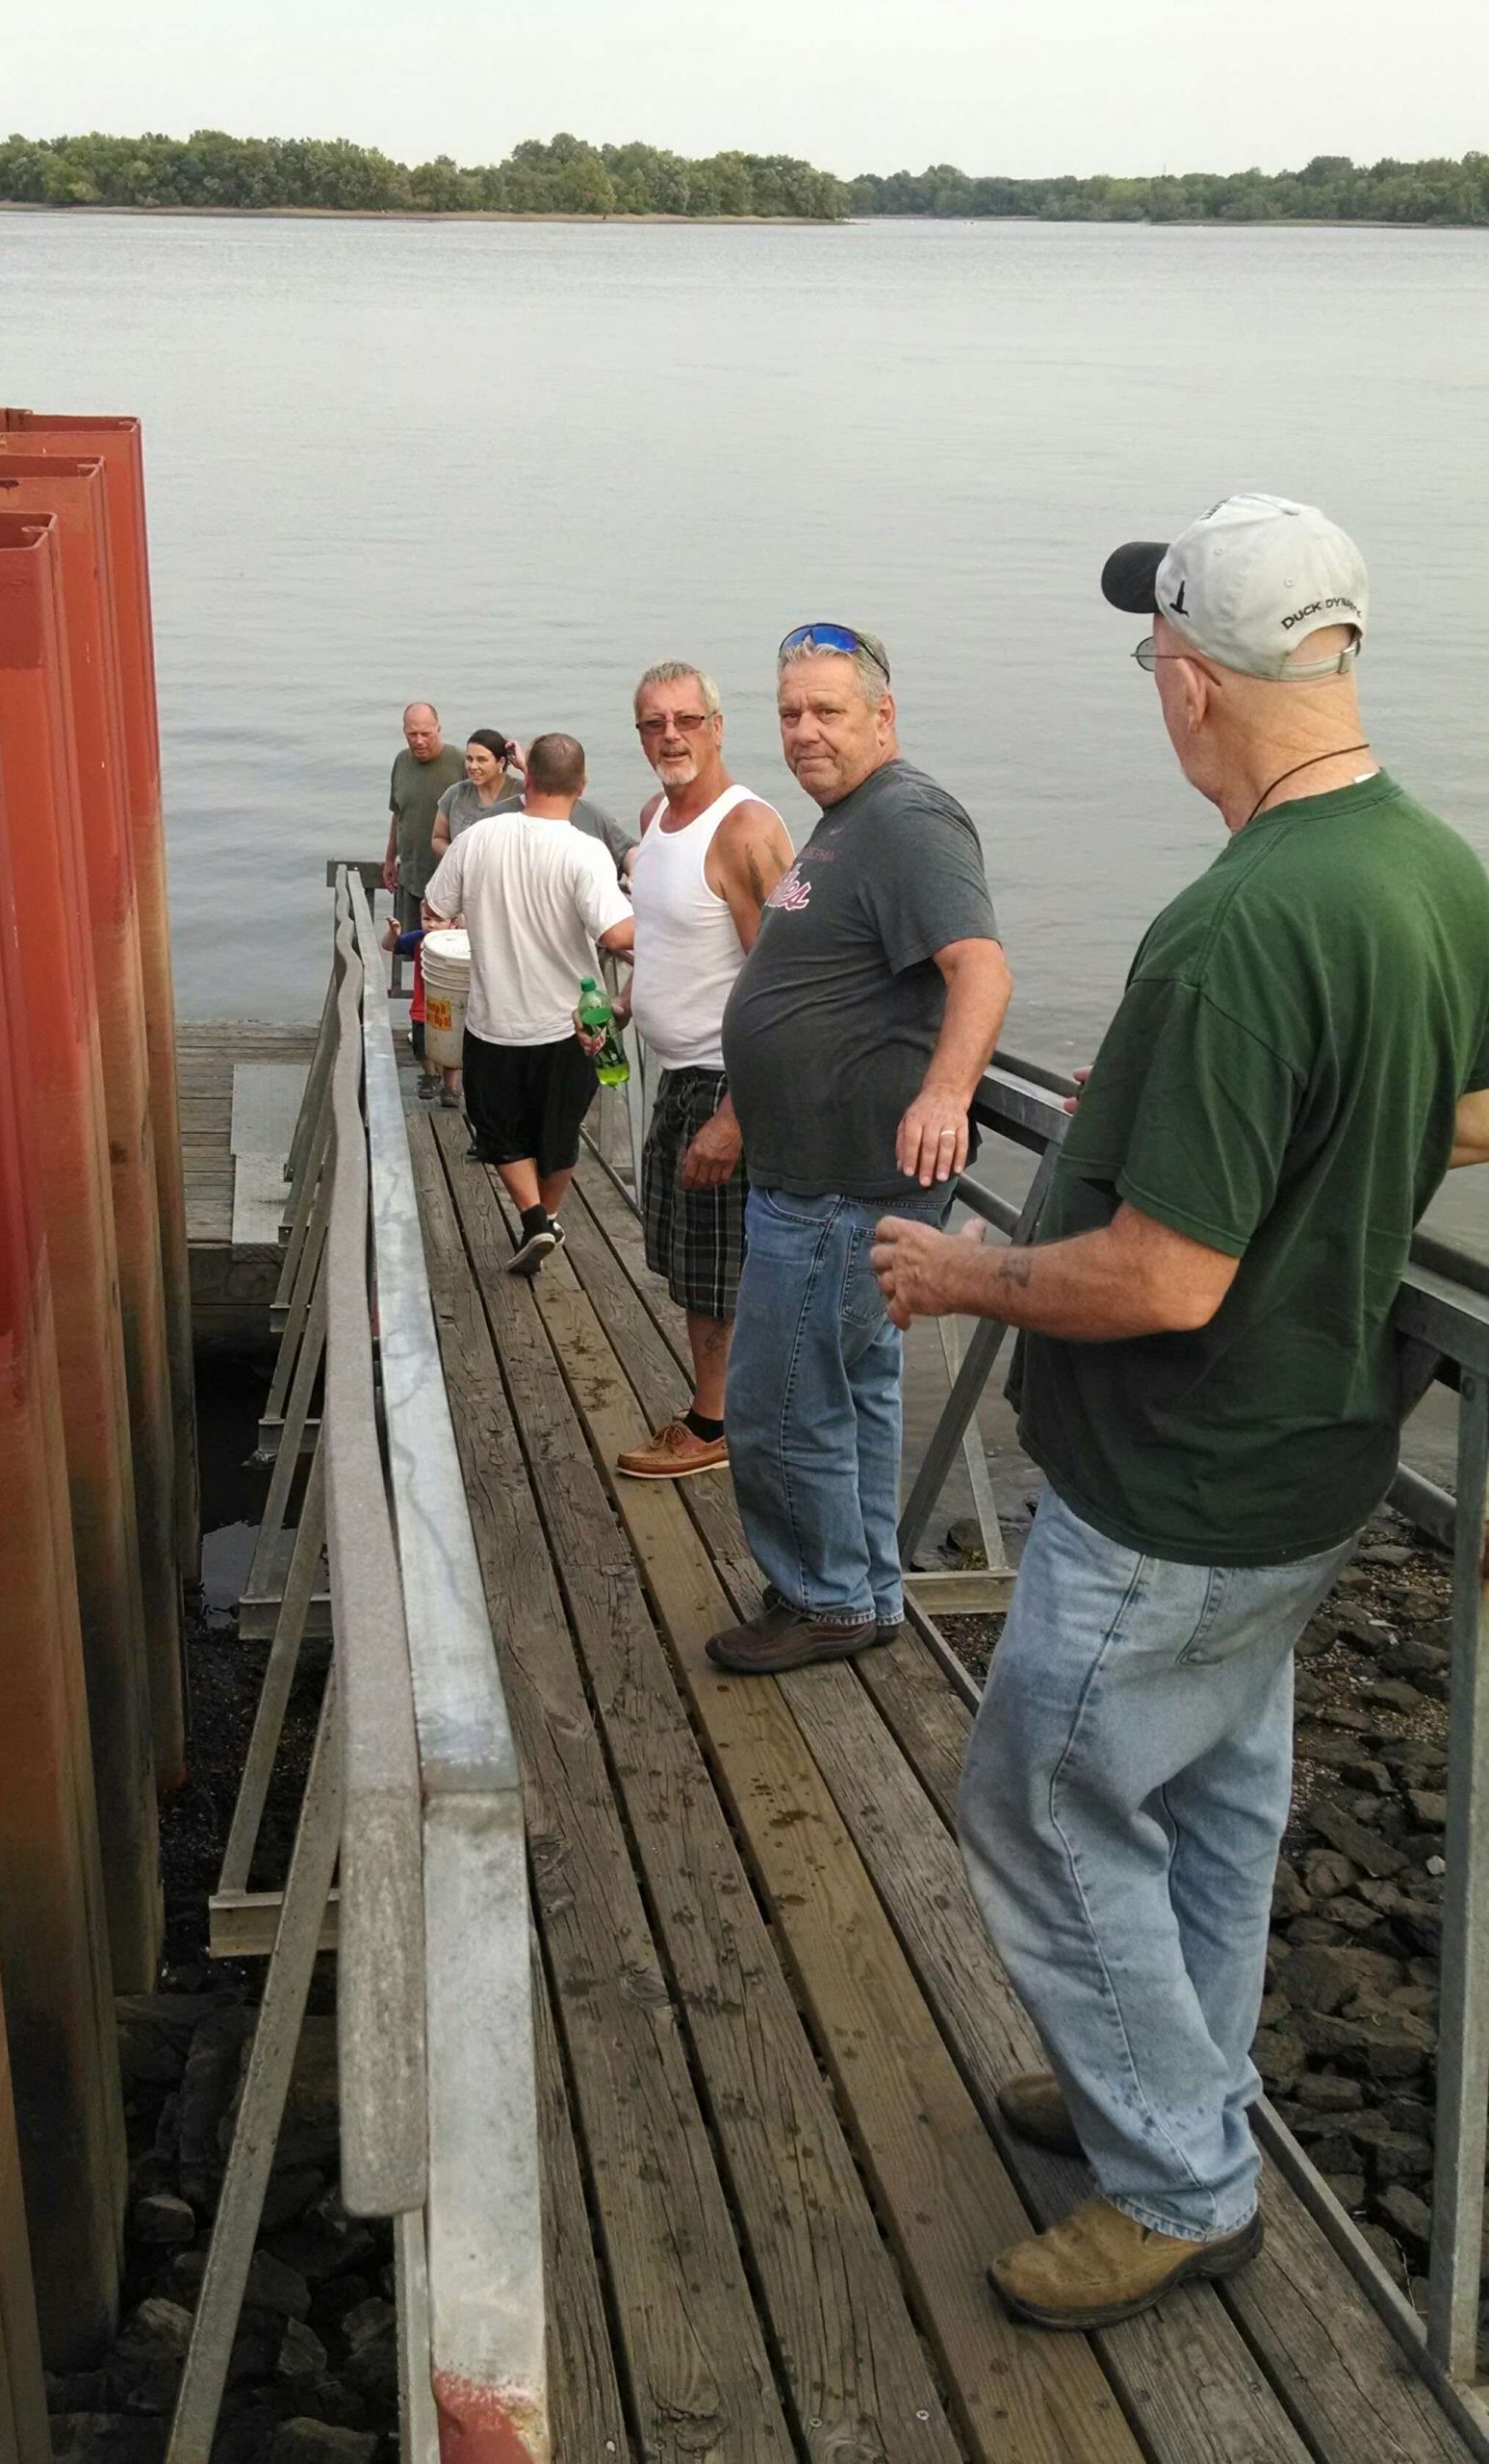 And then, something really unexpected happened: A group of local anglers formed a bucket brigade line down the walkway to the floating fishing dock to help!